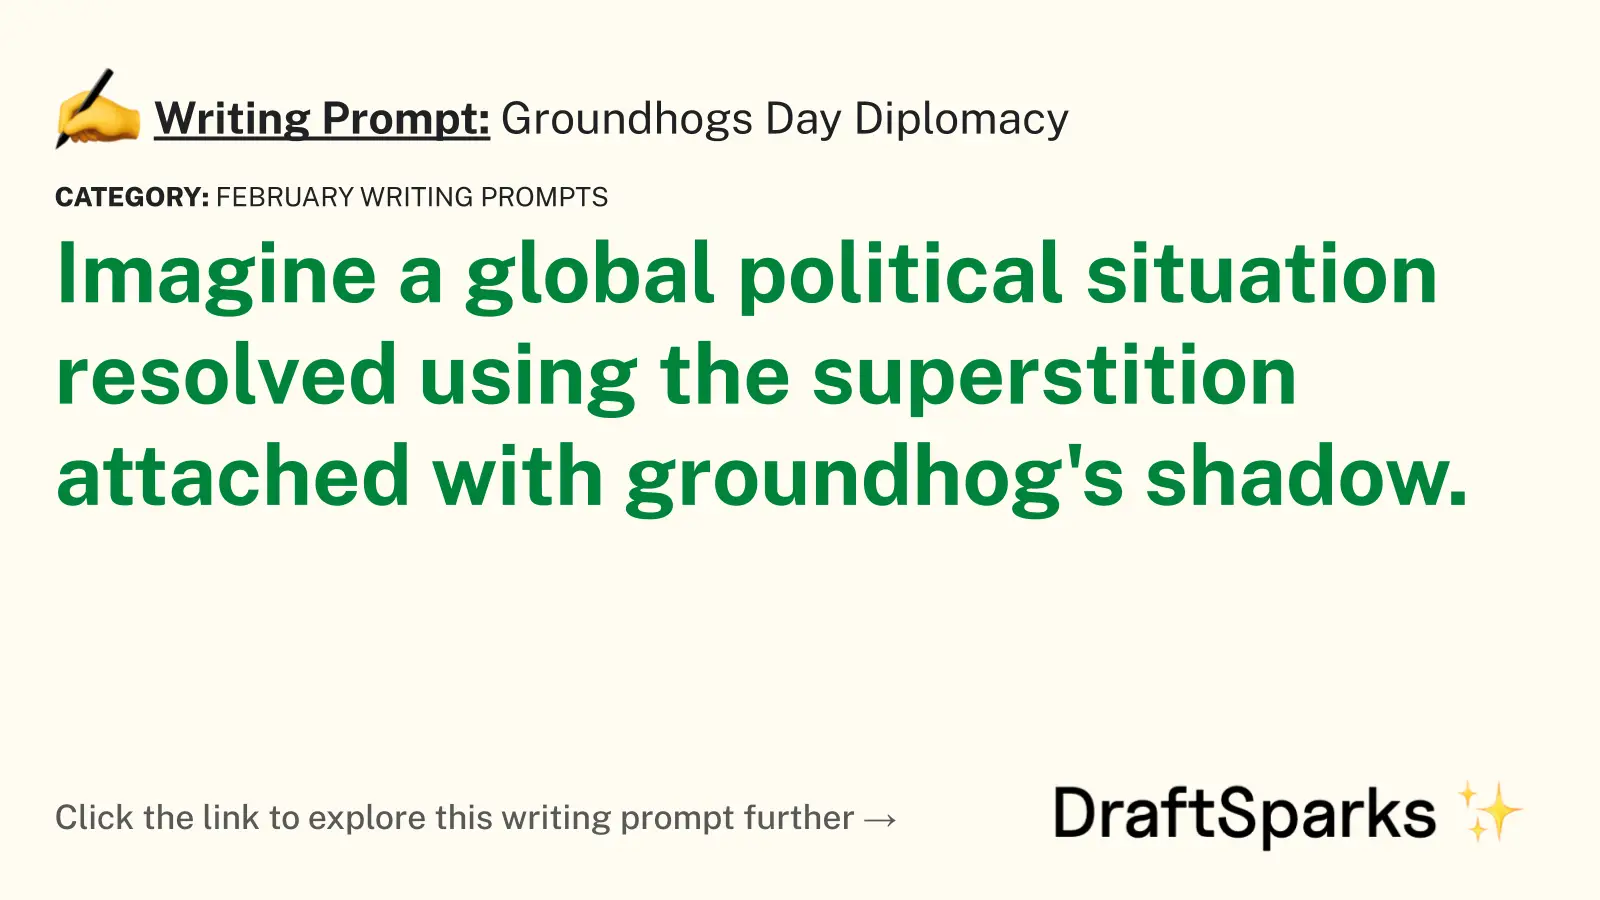 Groundhogs Day Diplomacy